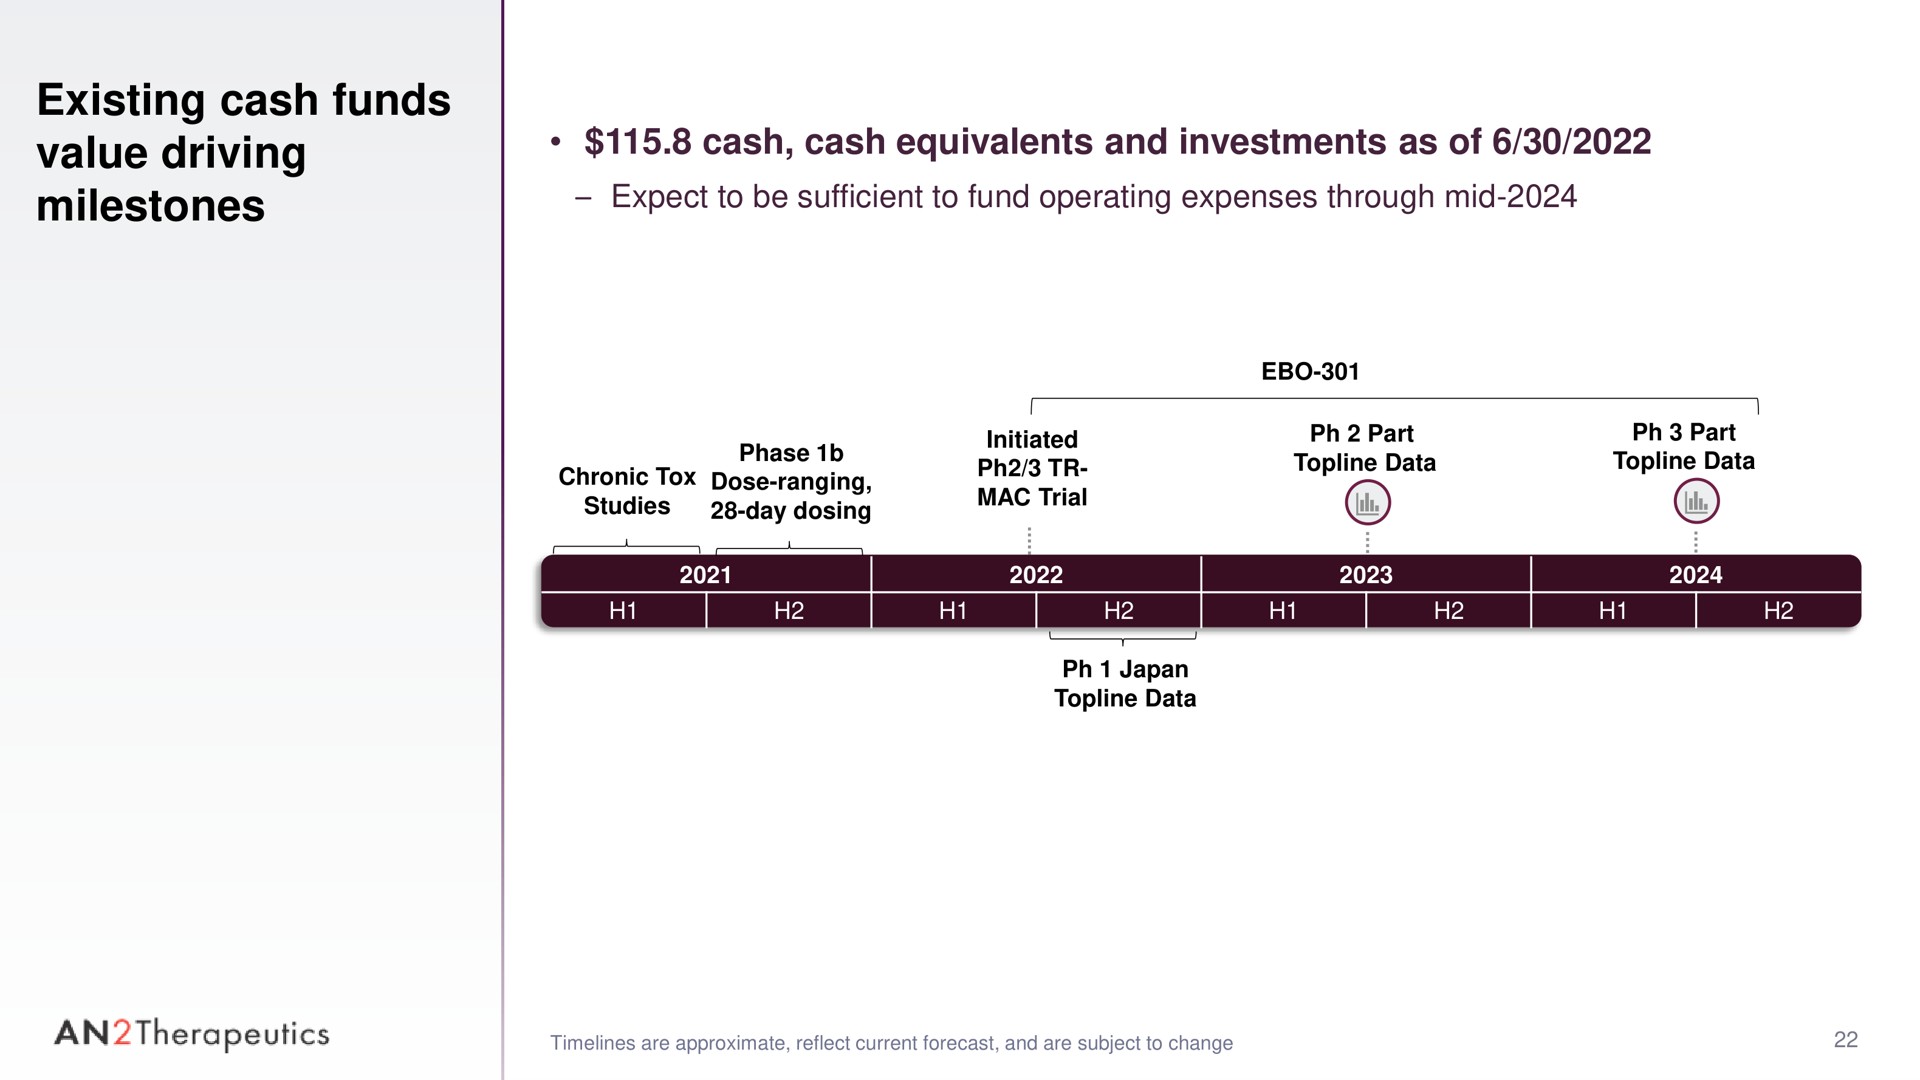 existing cash funds value driving milestones cash cash equivalents and investments as of an therapeutics | AN2 Therapeutics